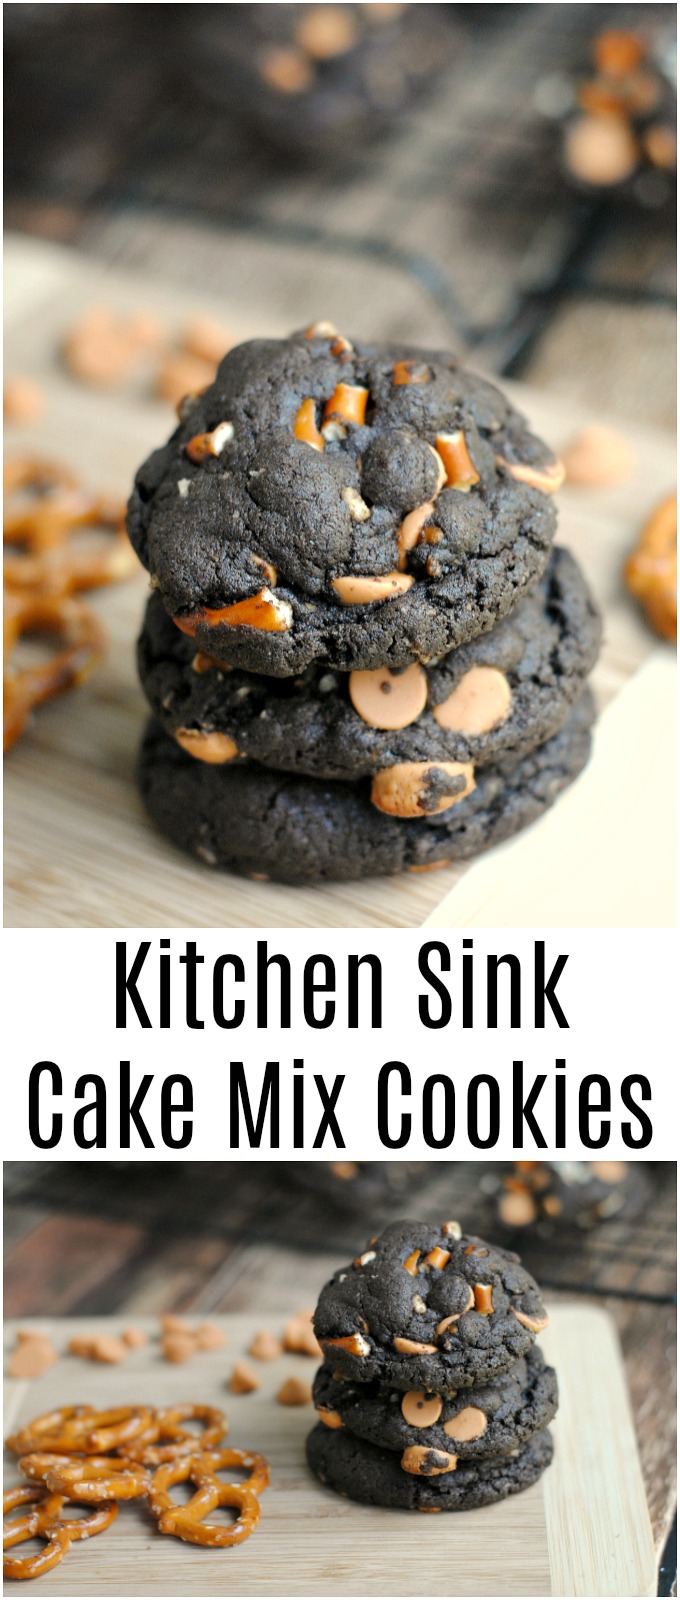 Kitchen Sink Cake Mix Cookies Recipe The Rebel Chick